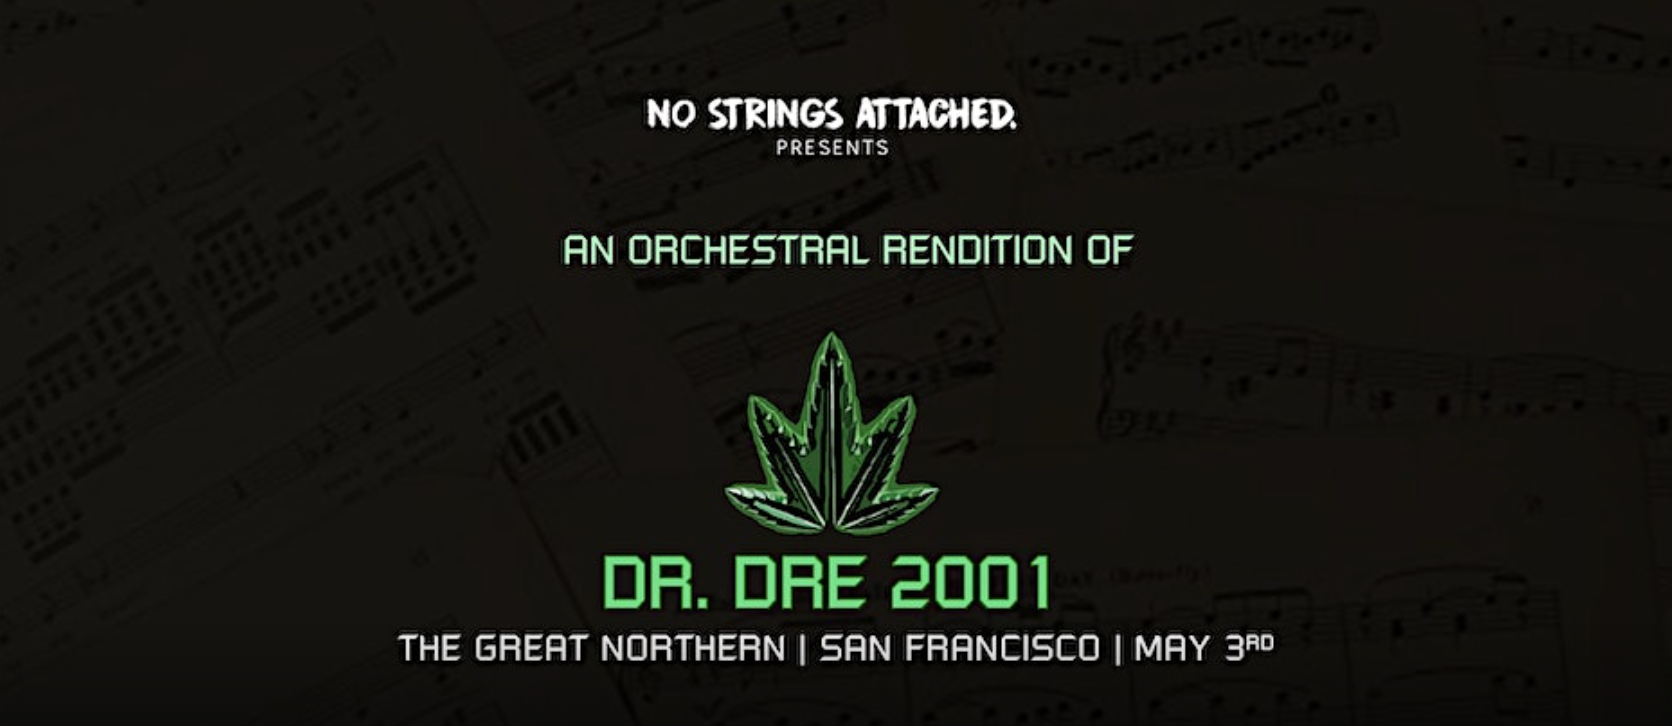 ORCHESTRAL RENDITION OF DR. DRE: 2001 - フライヤー表